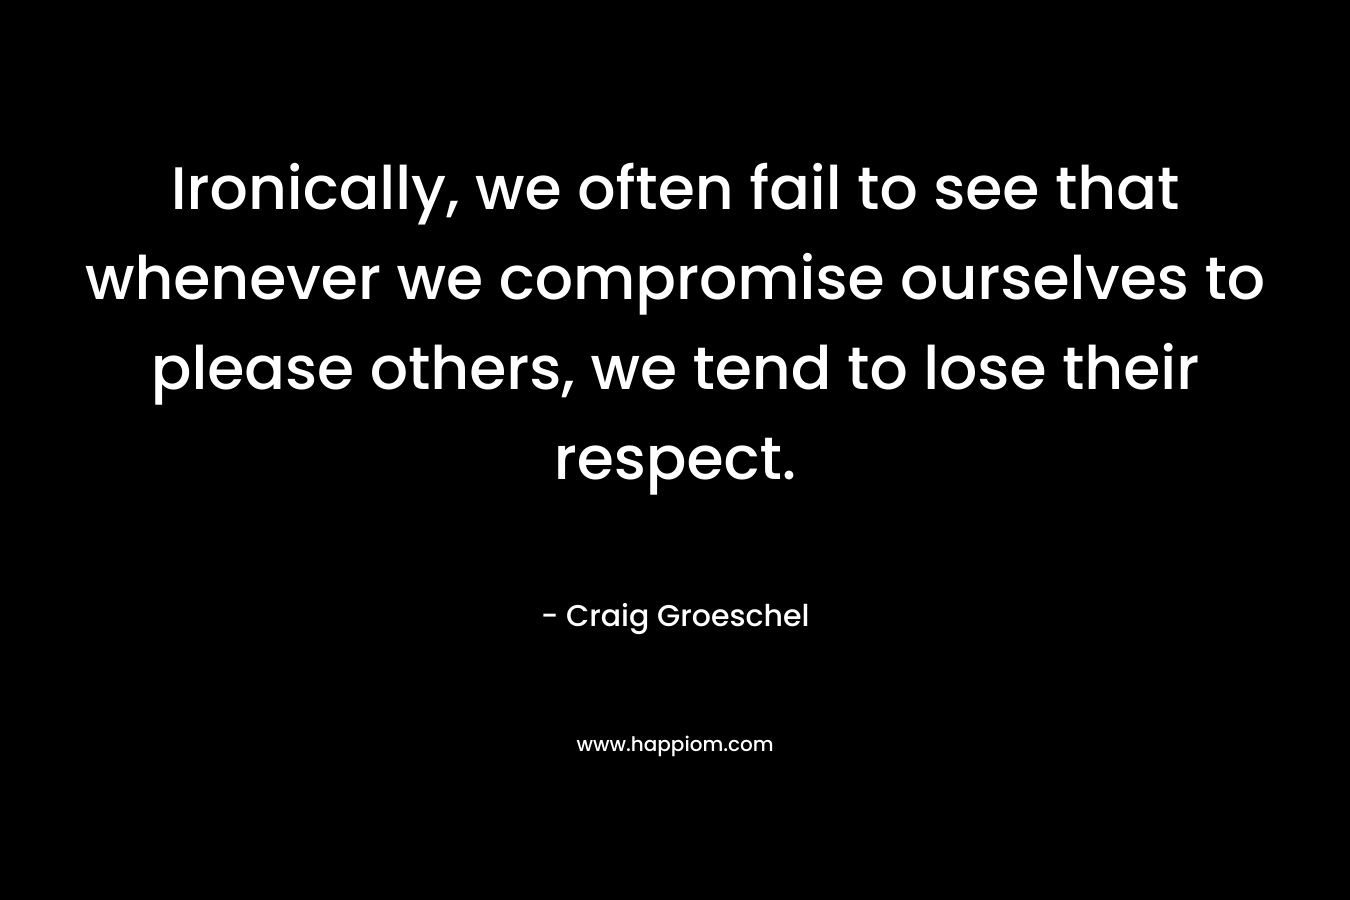 Ironically, we often fail to see that whenever we compromise ourselves to please others, we tend to lose their respect. – Craig Groeschel